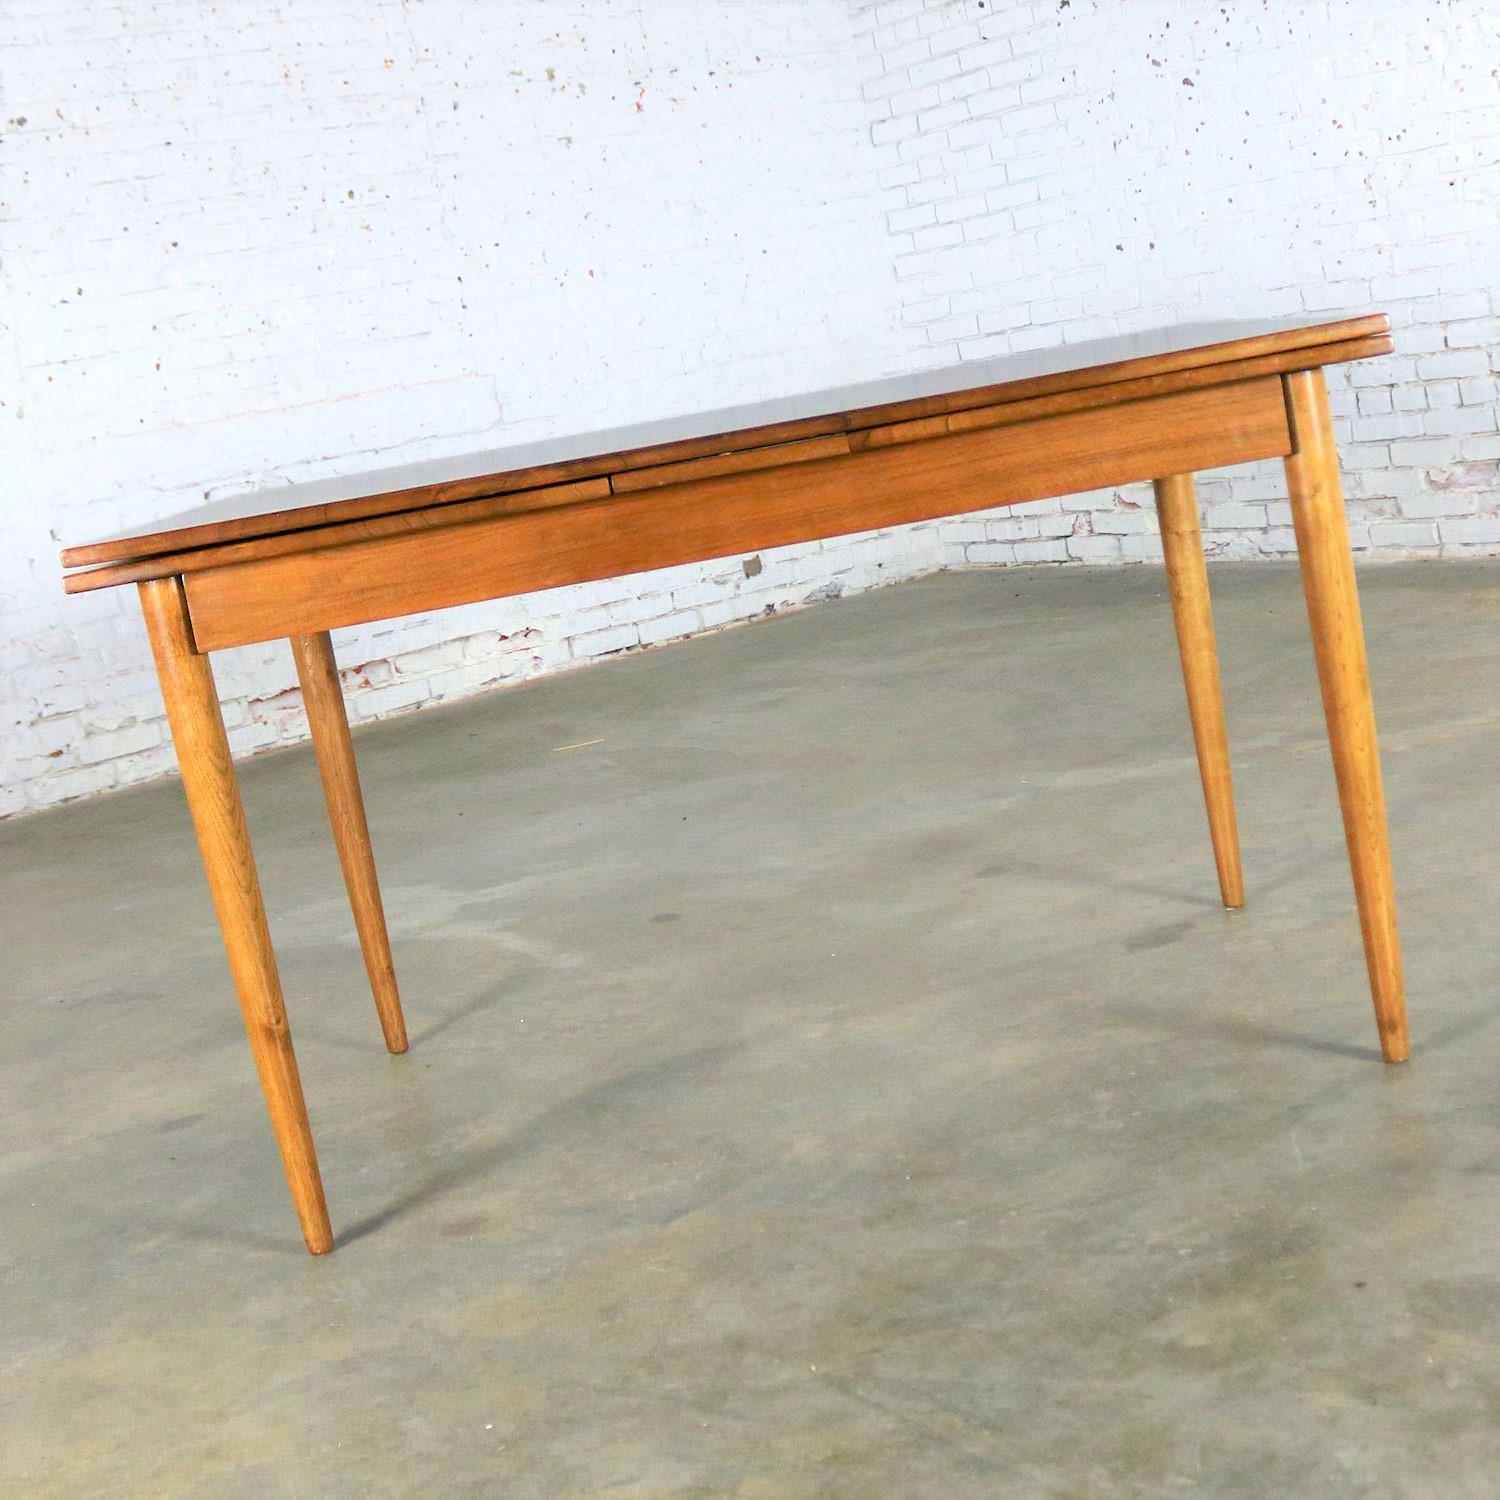 Handsome Mid-Century Modern draw leaf and extending dining table after Conant ball. It is in good vintage condition. We believe it to have been refinished at some point in its life and there is a small spot of missing veneer on the bottom edge on